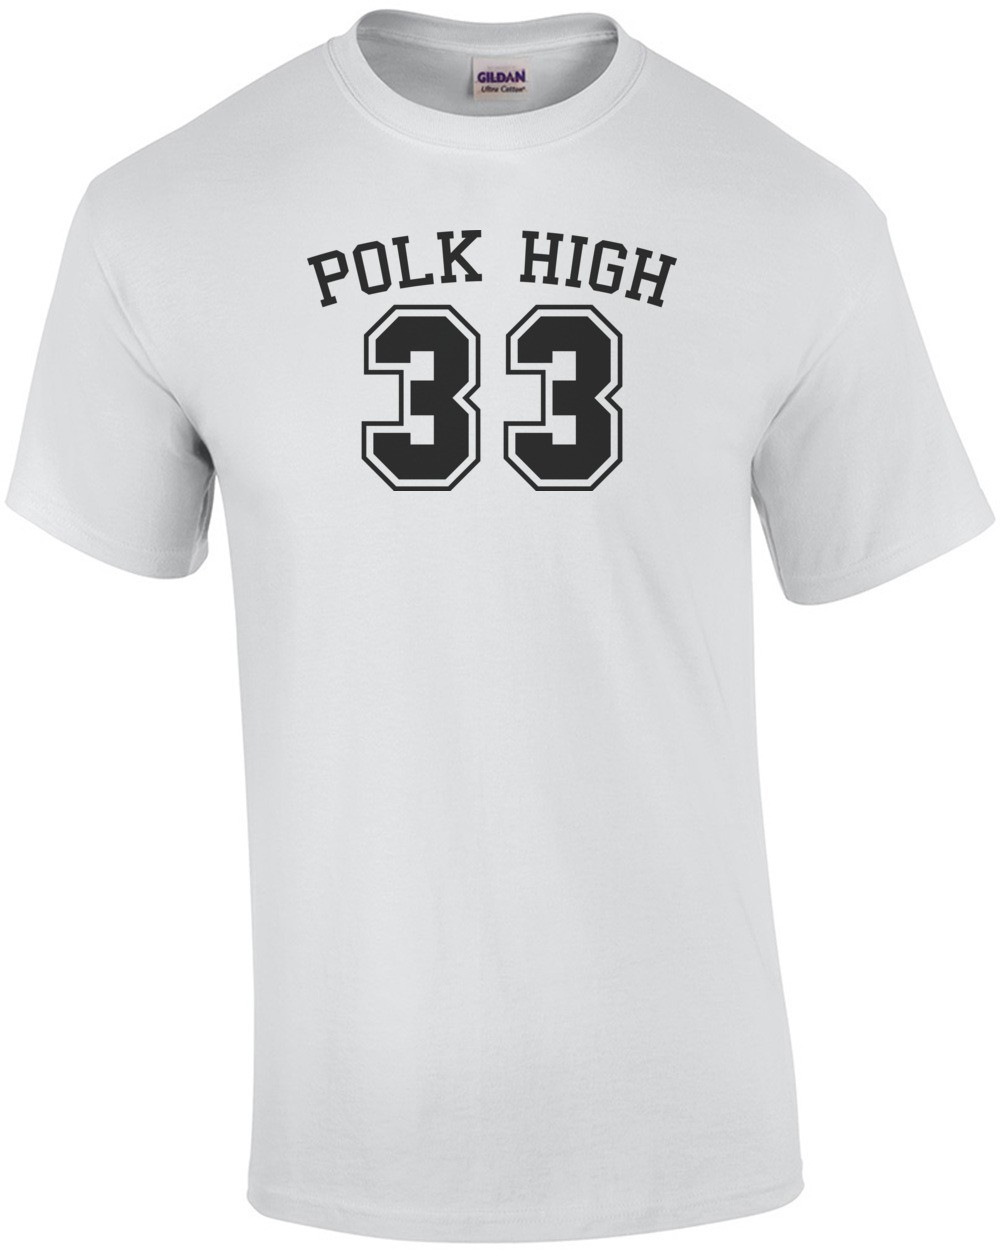 Mens Polk High Tank Top Married with Children 